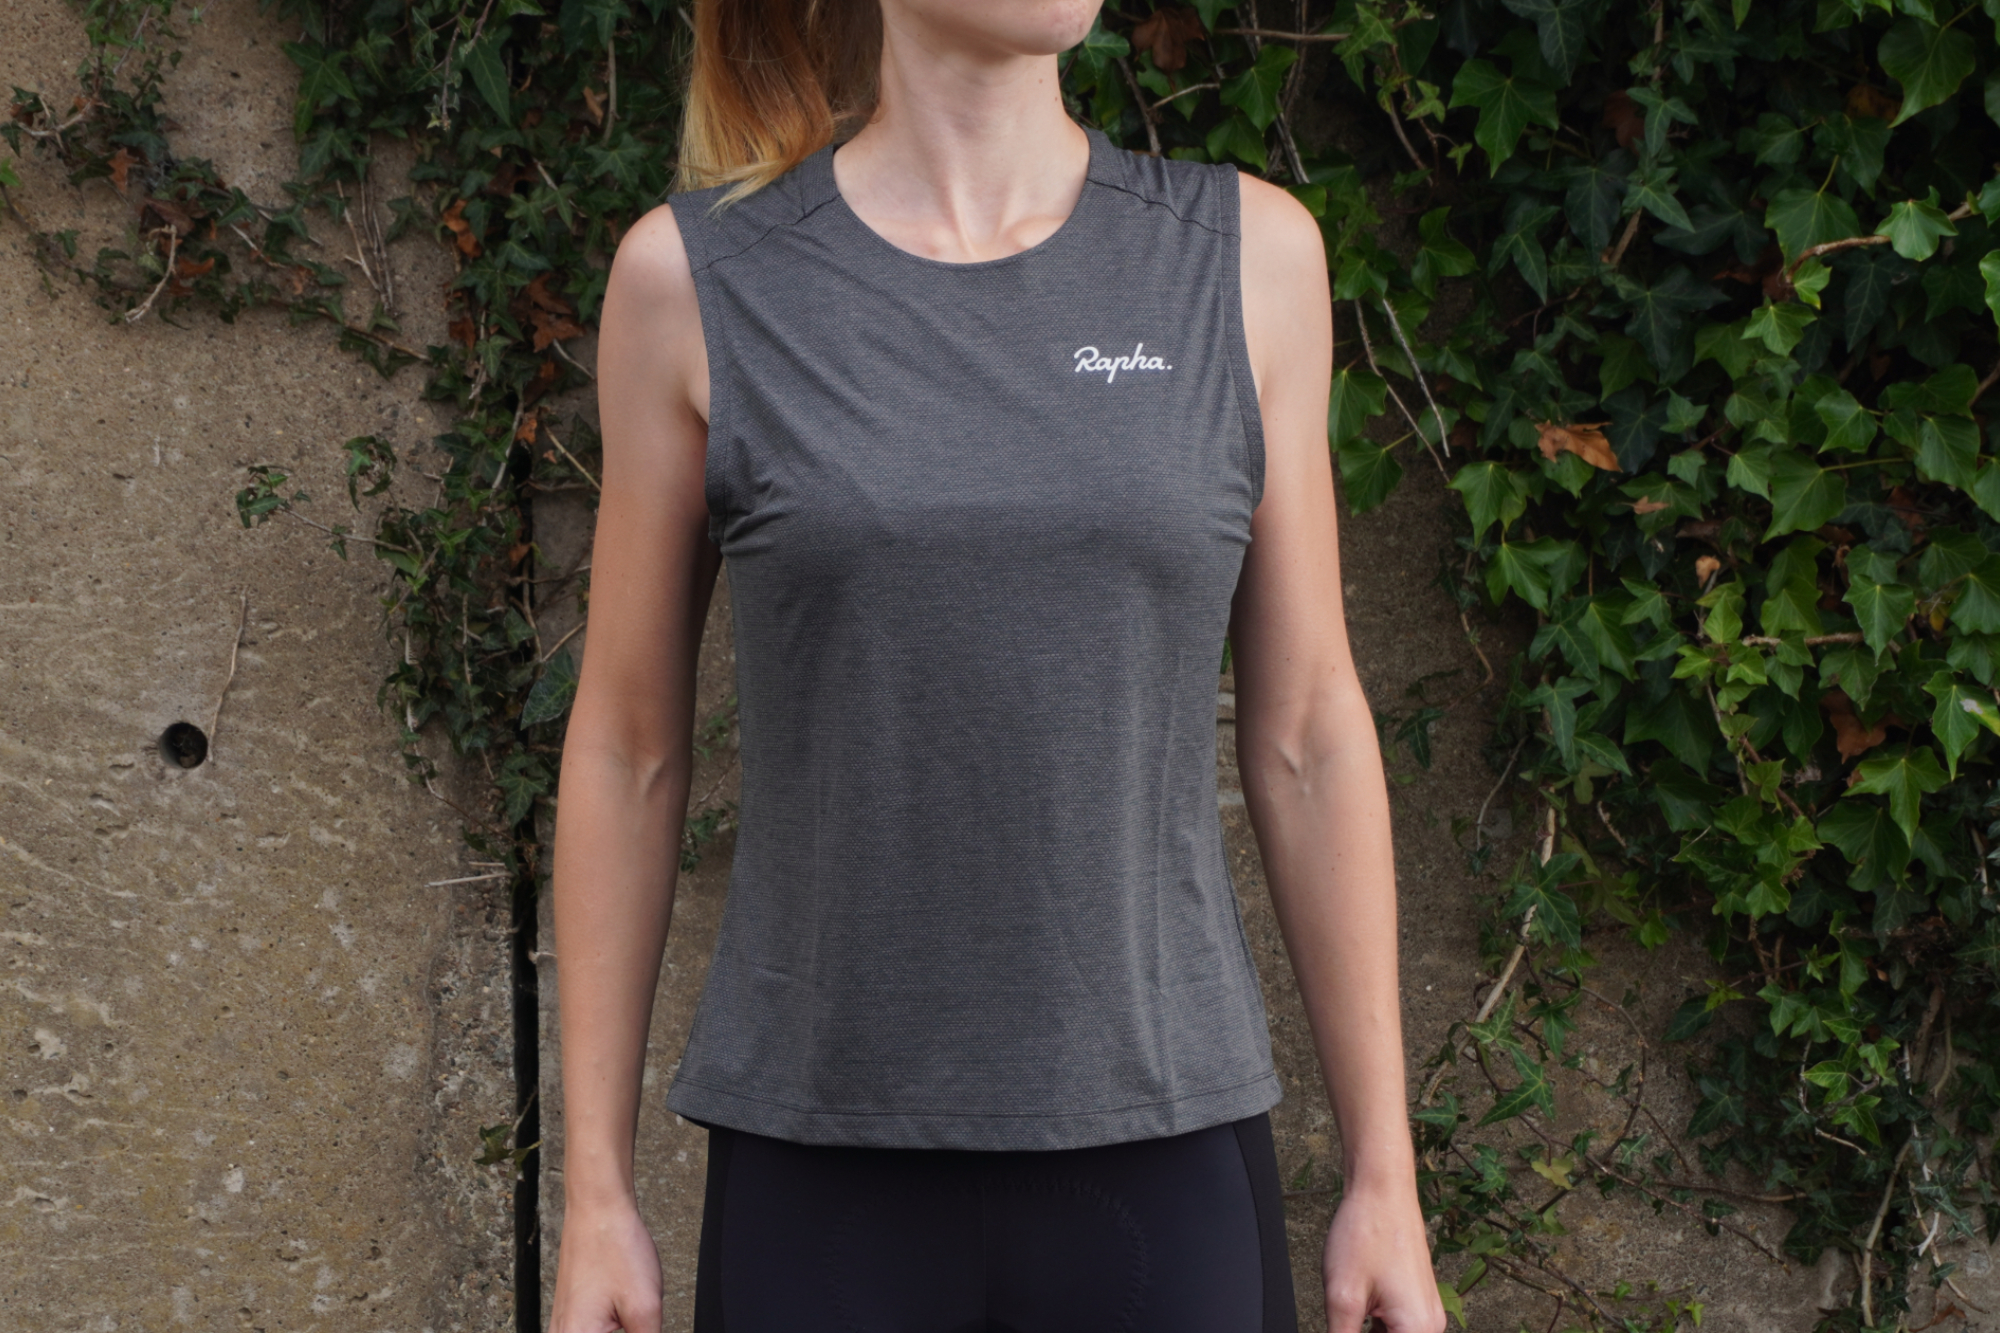 Anna Abram wearing the Rapha Women’s Trail Tank, which is among the best women's gravel cycling clothing